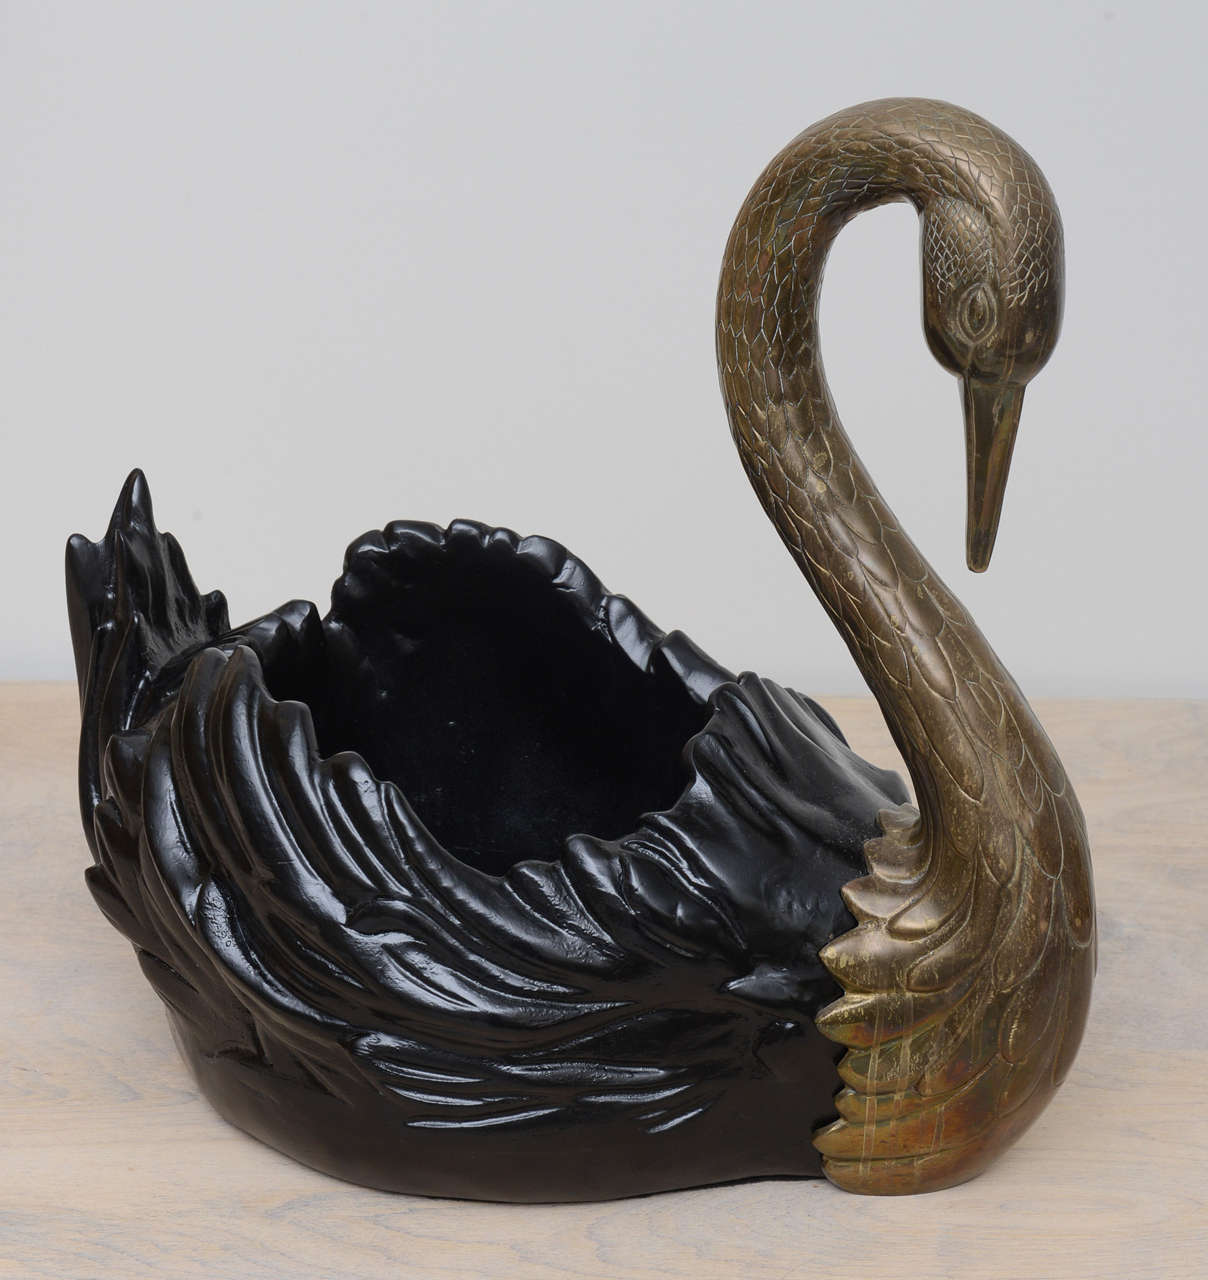 Charming swan center piece with lovely patina.